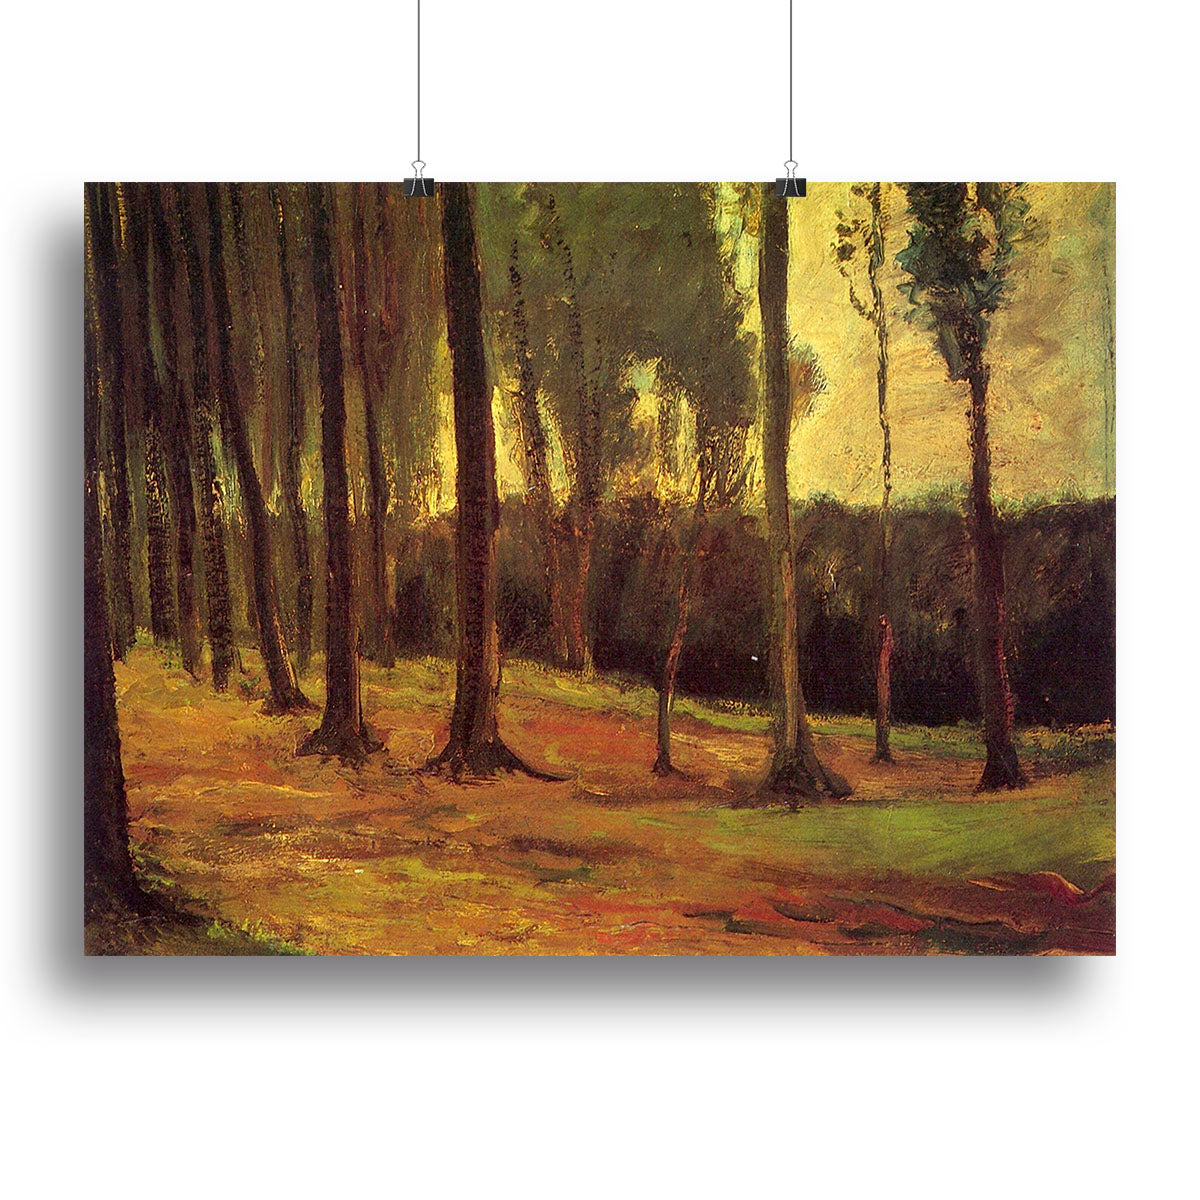 Edge of a Wood by Van Gogh Canvas Print or Poster - Canvas Art Rocks - 2